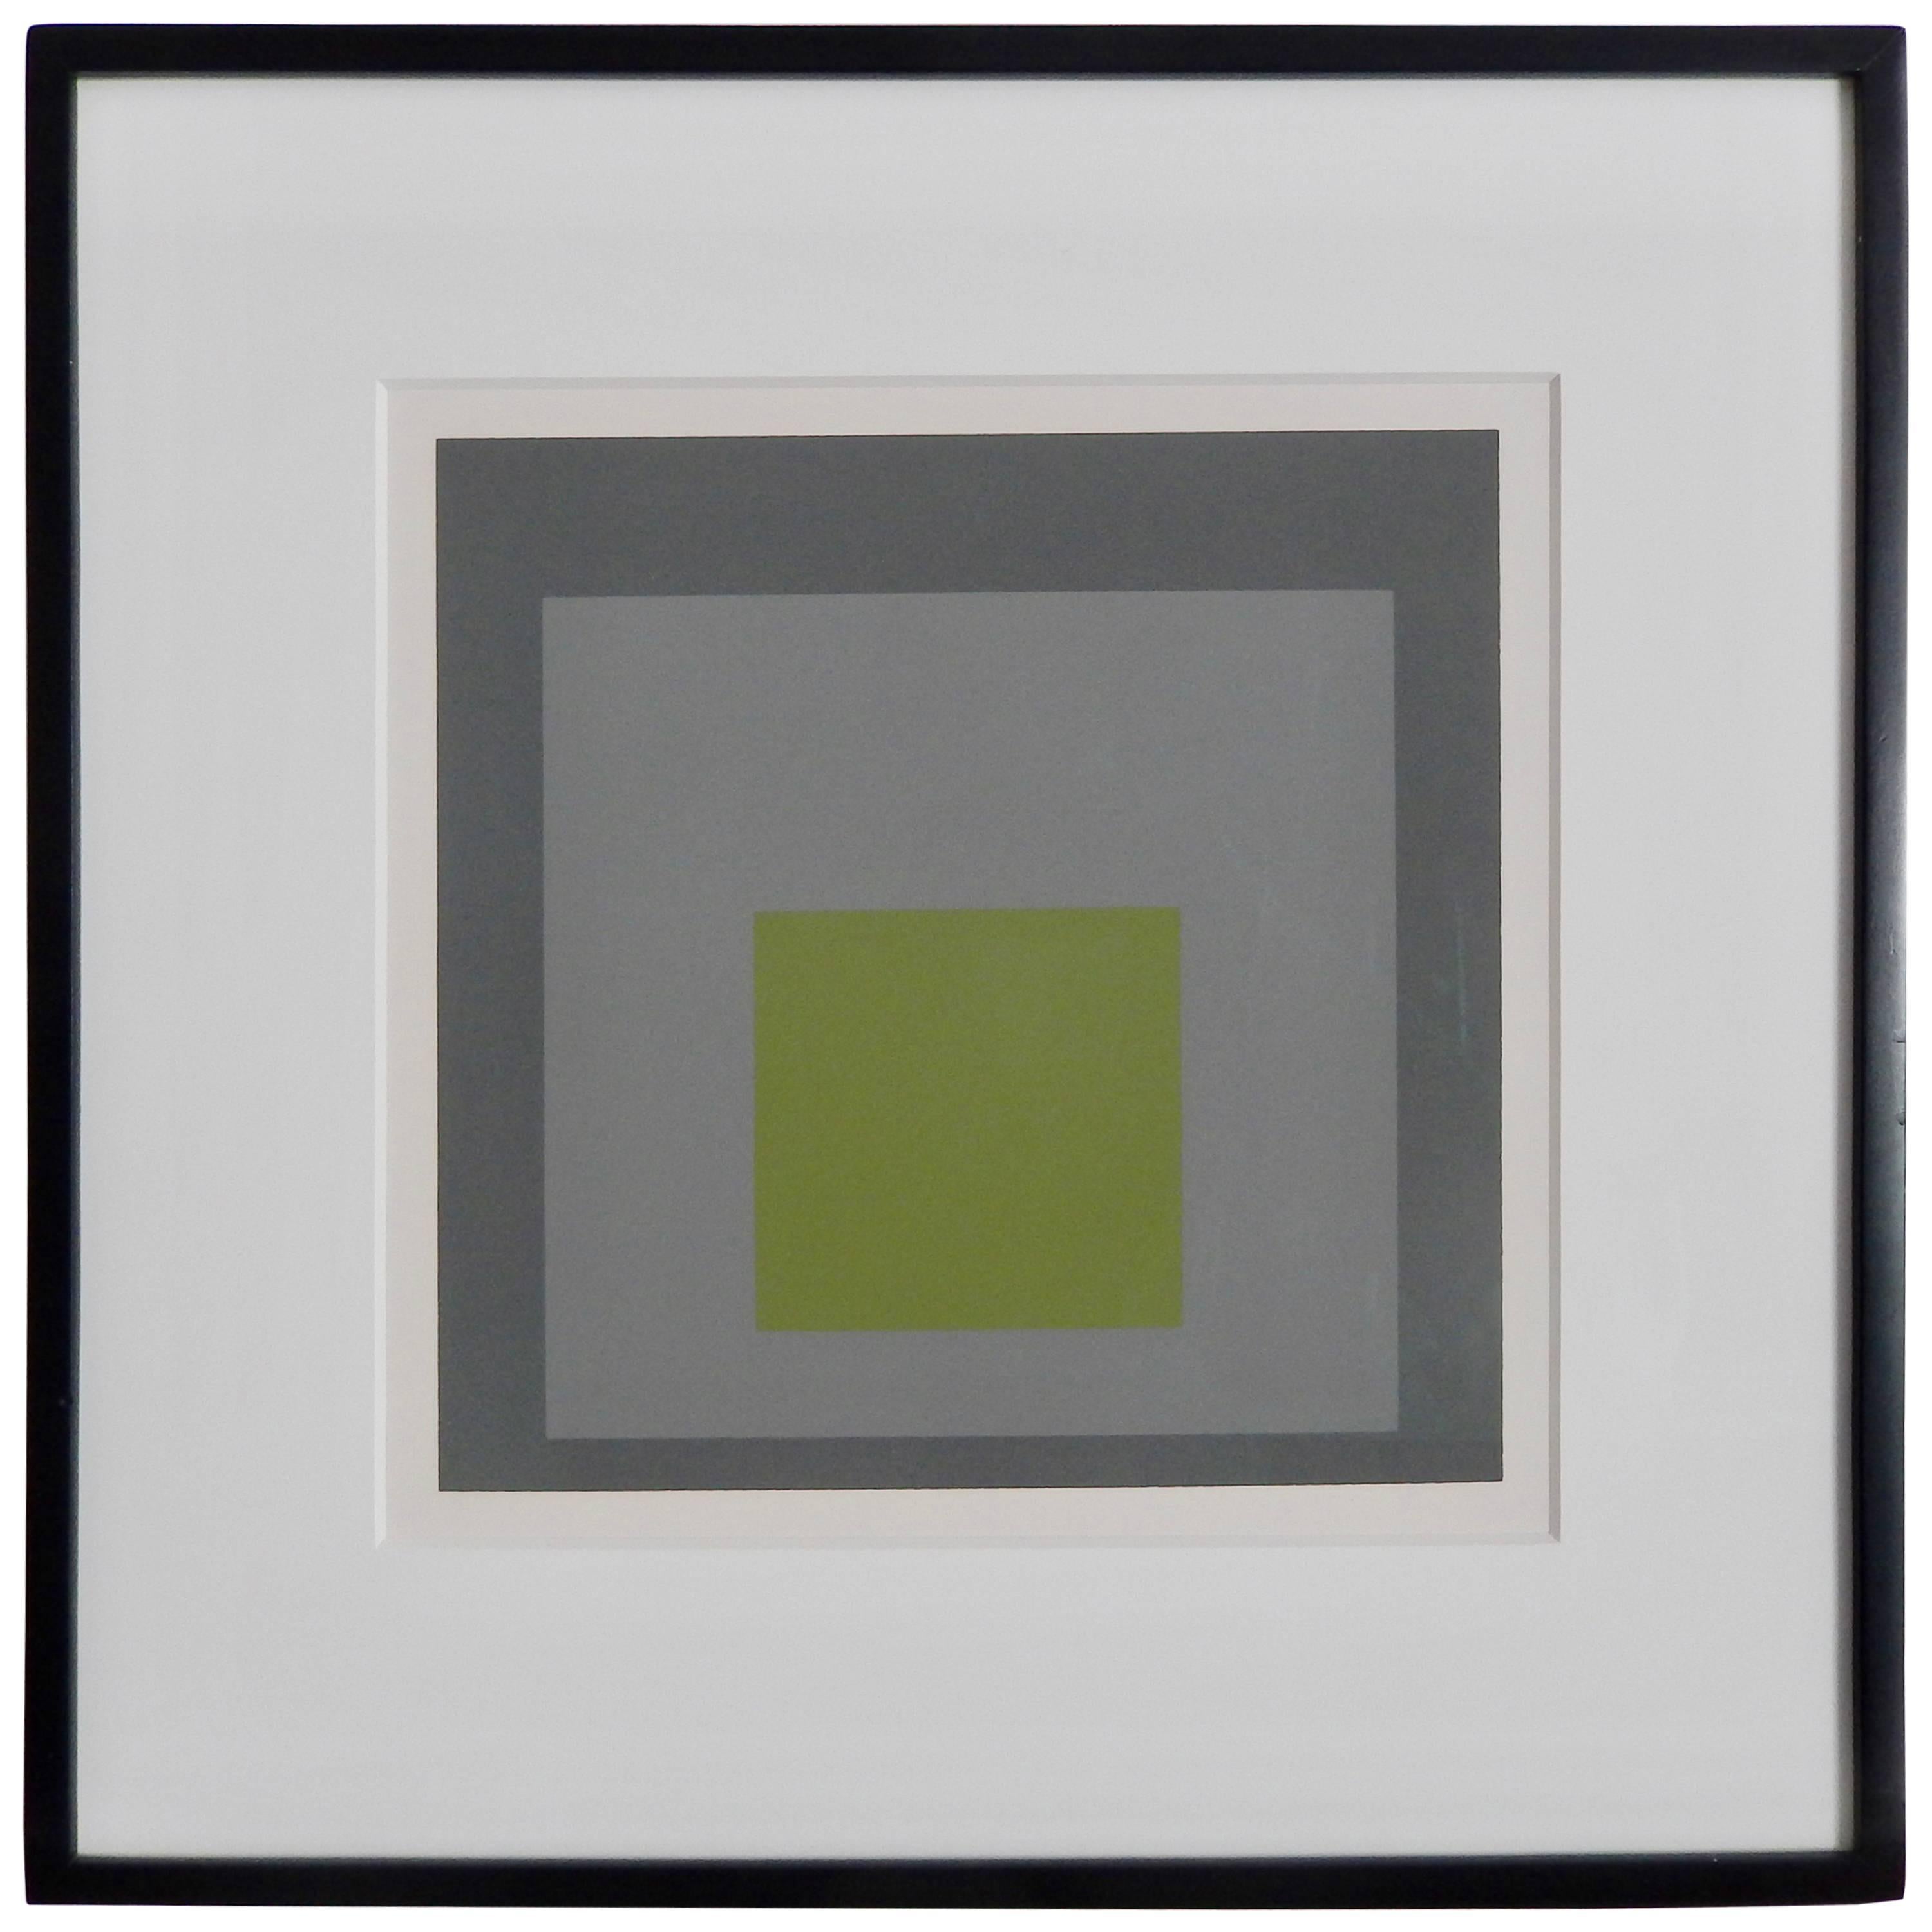 Josef Albers, "Thaw" Screen Print #2, Homage to the Square, 1962